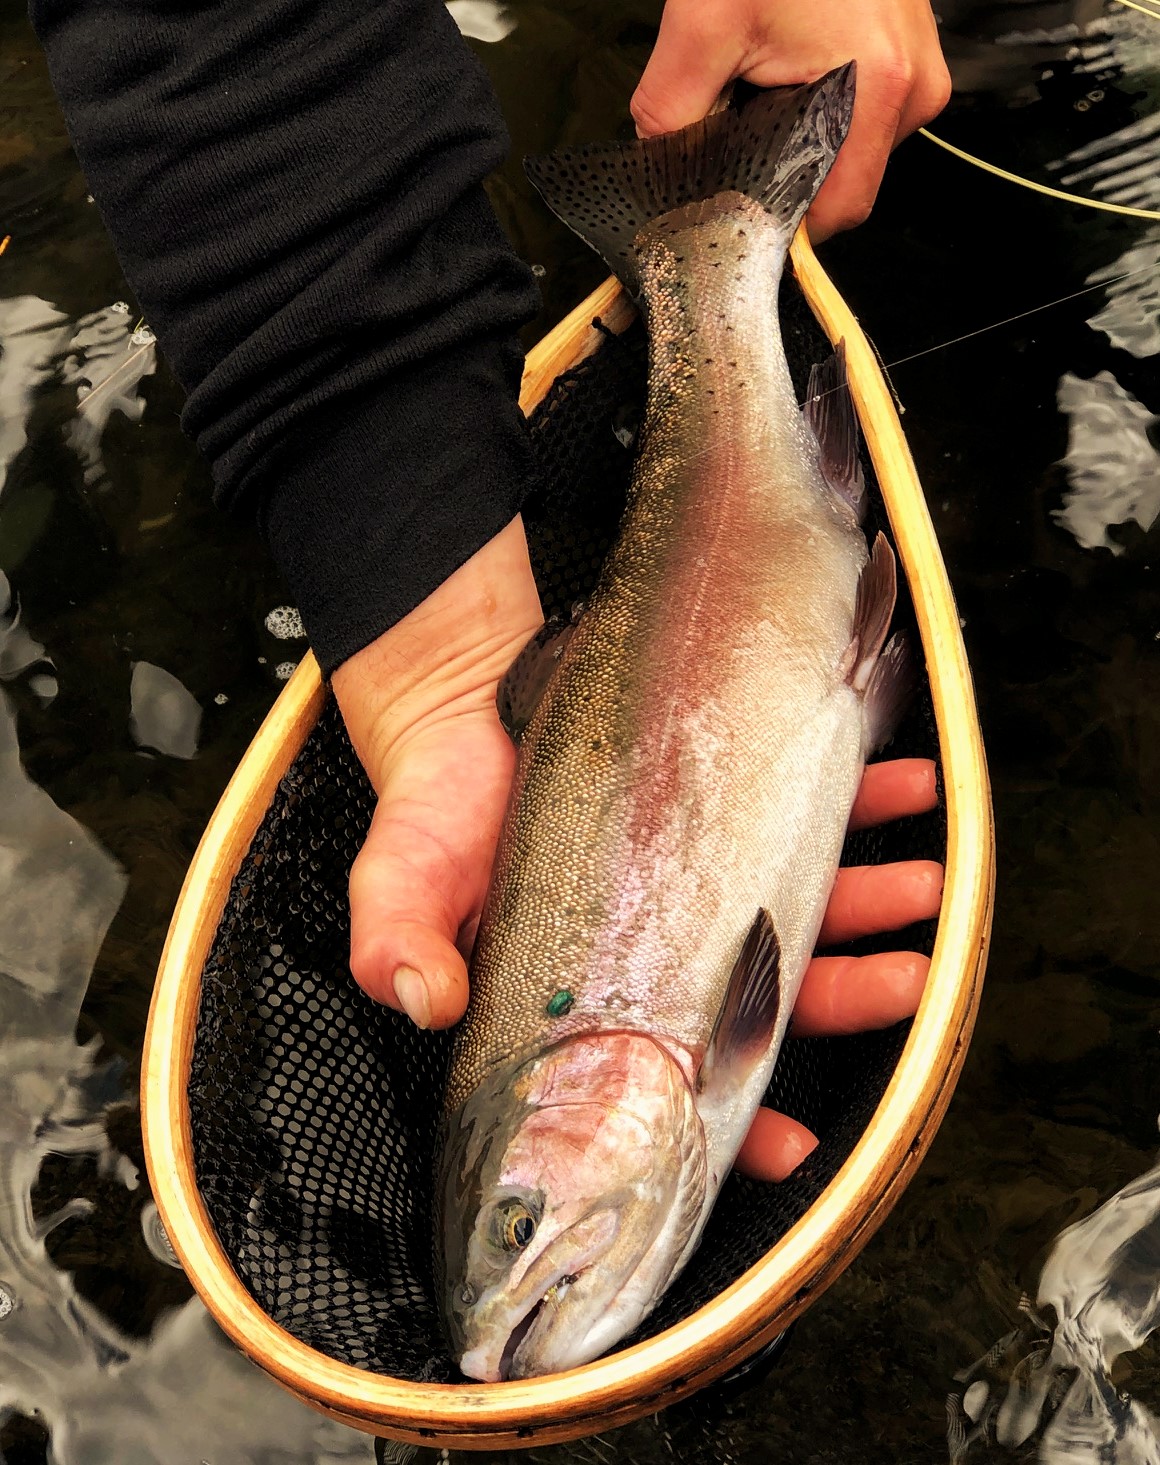 Aroostook River offers prime trout fishing - The County